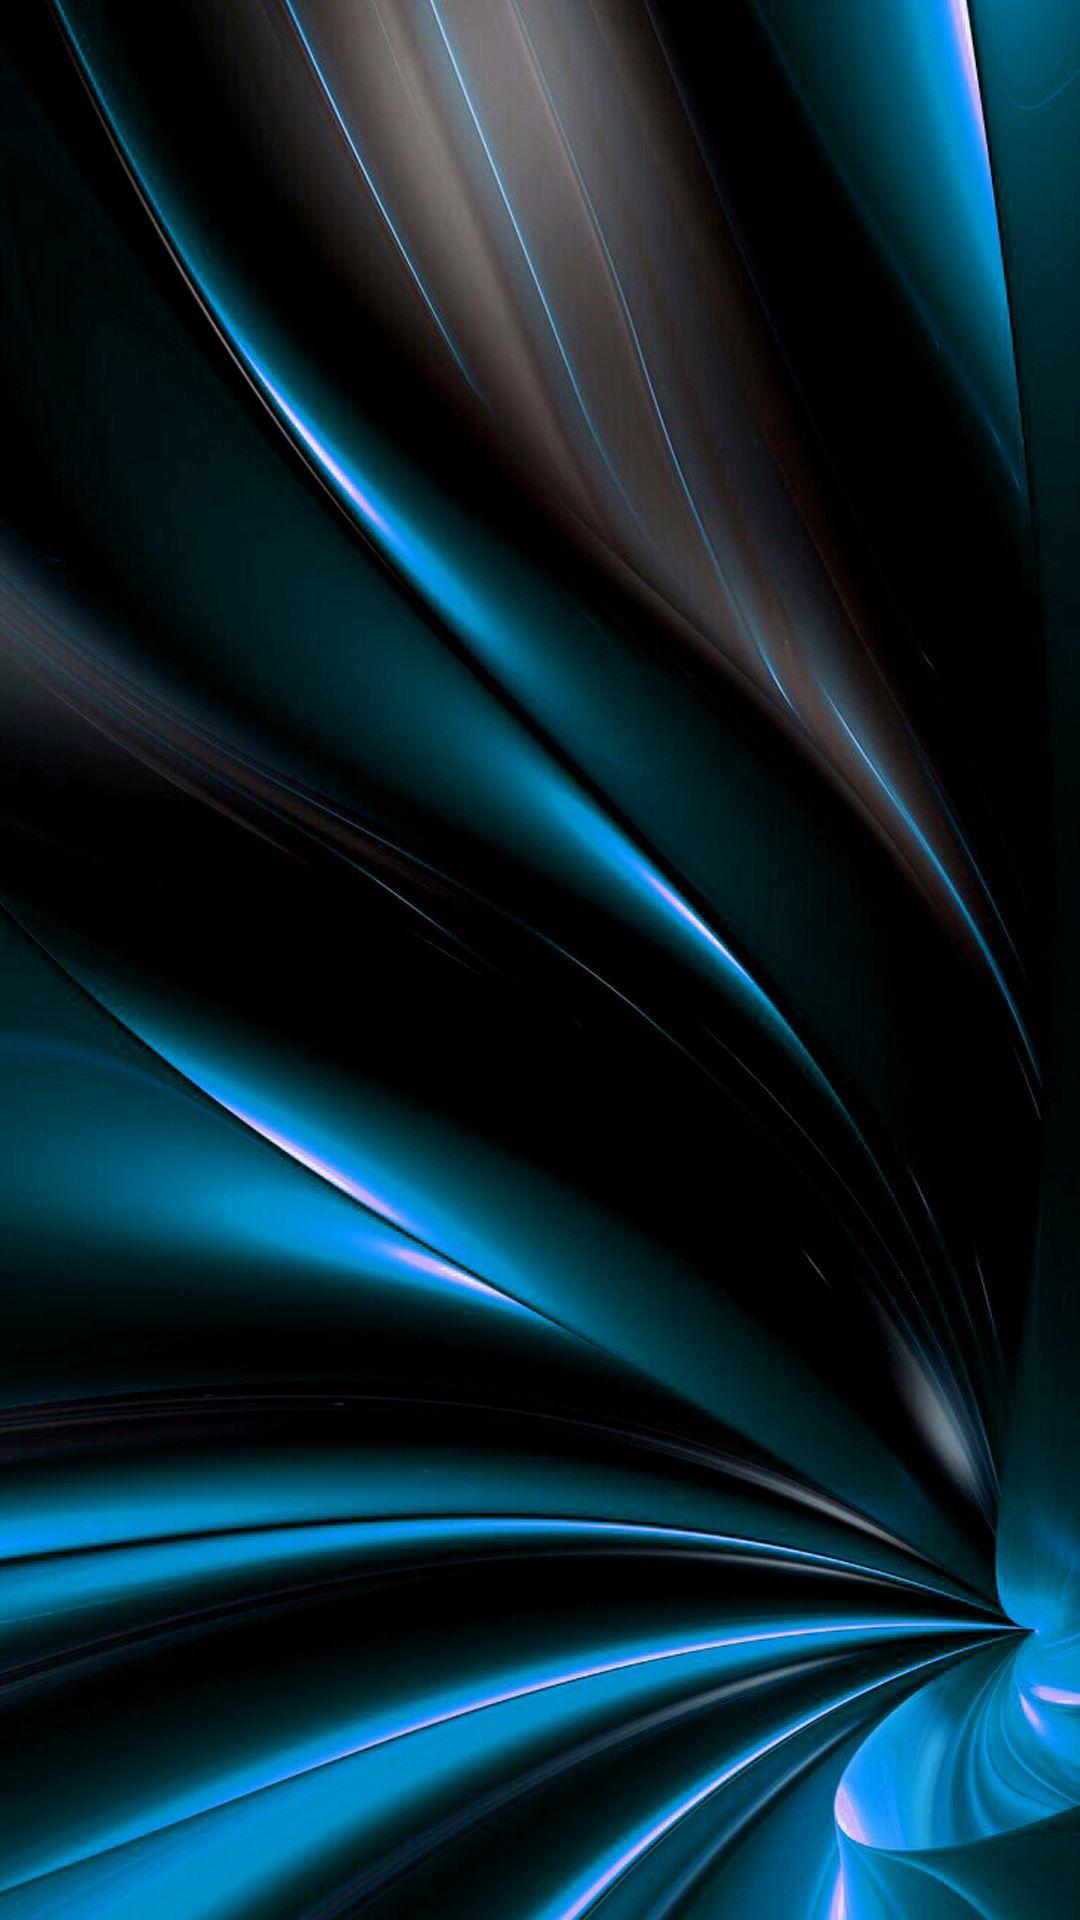 Cool Phone Wallpaper 04 of 10 with Dark Grey Background for OnePlus 3 Wallpaper. Wallpaper Download. High Resolution Wallpaper. Cool wallpaper for phones, Blue and gold wallpaper, Dark blue wallpaper